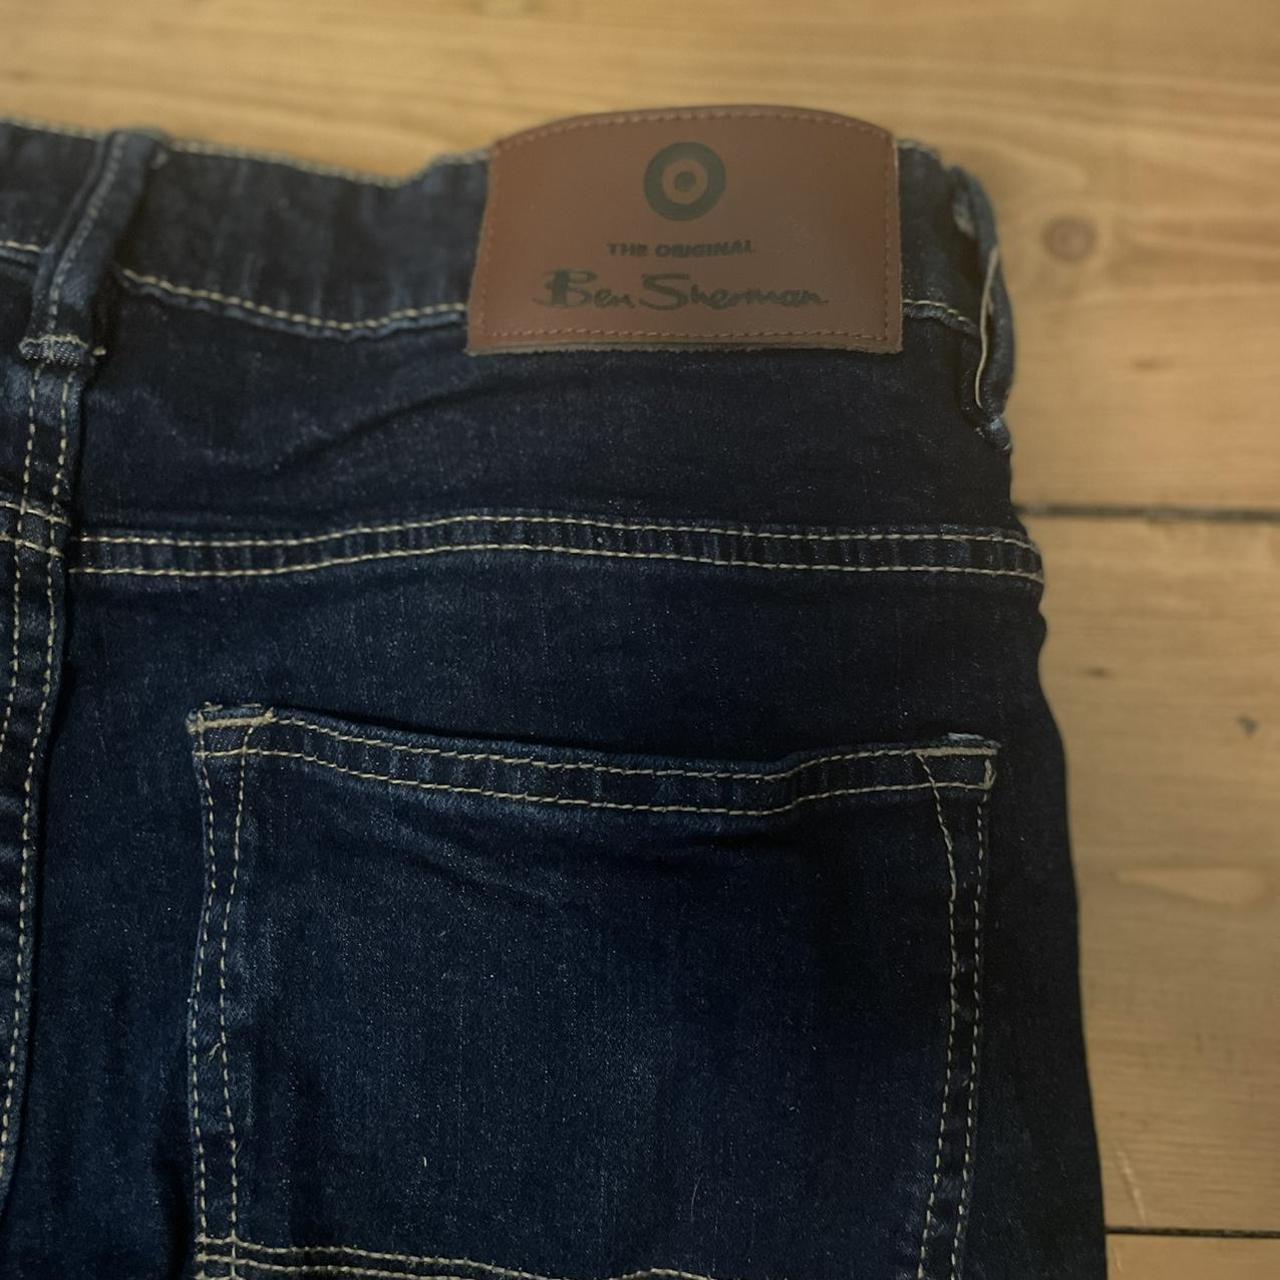 Authentic Ben Sherman jeans Slim fit with 32... - Depop